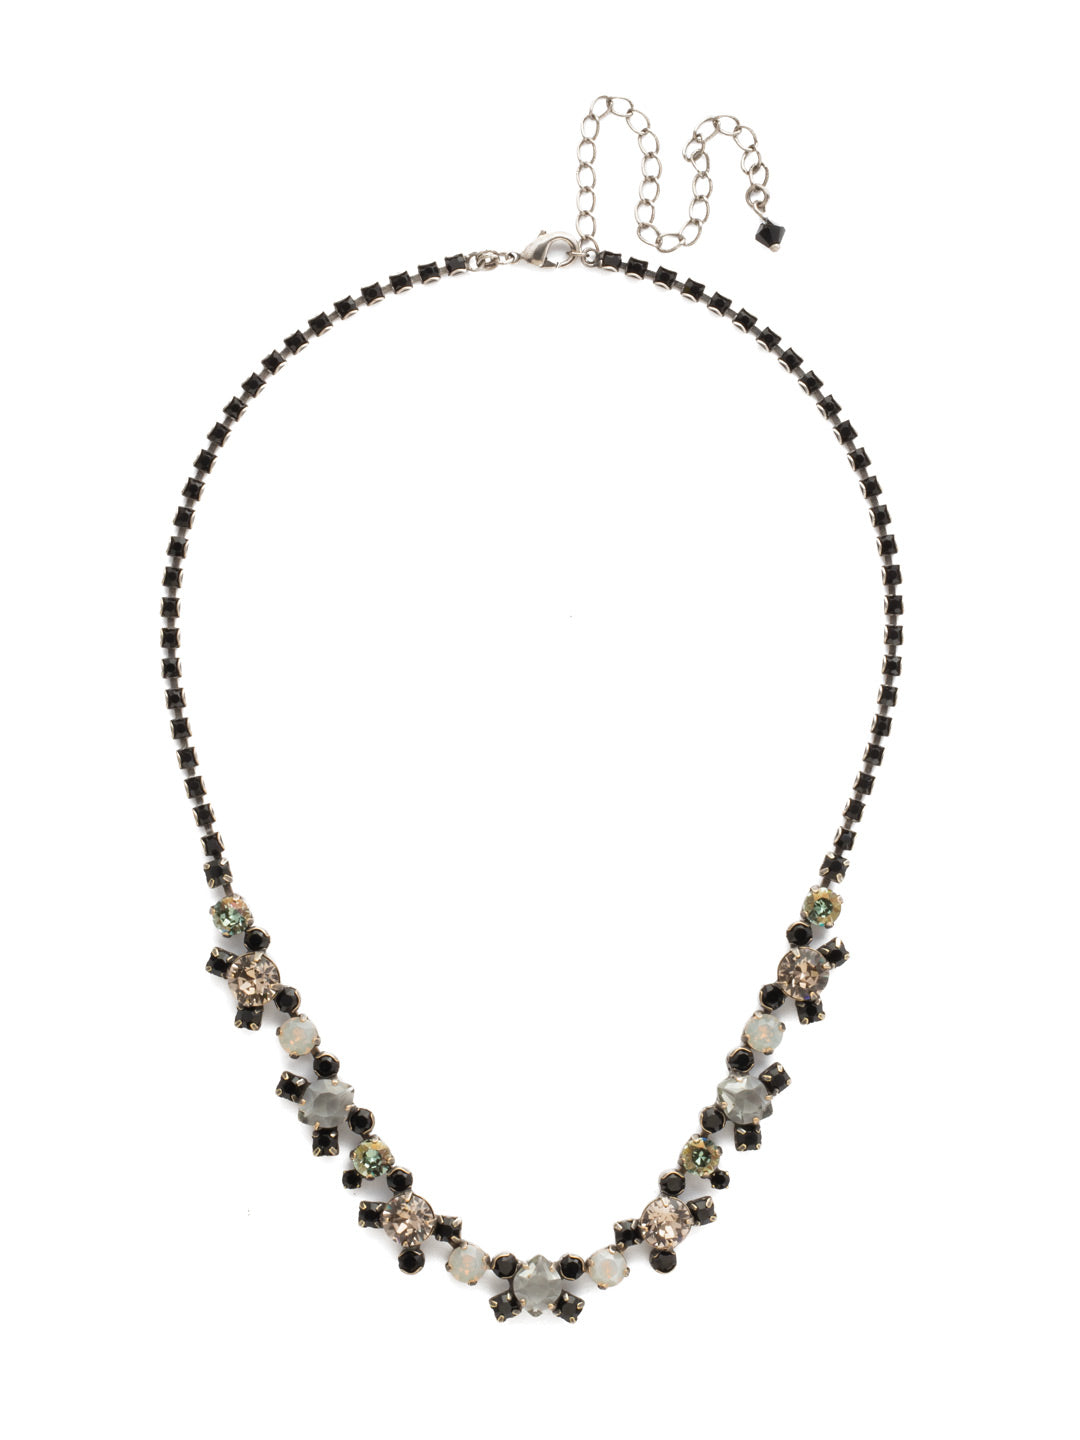 Perfect Harmony Line Tennis Necklace - NDK11ASBON - <p>This classic line necklace features stations of crystal clusters alternating between round cut and pear shaped central stones, blending in perfect harmony! A rhinestone chain completes this design with all around sparkle. From Sorrelli's Black Onyx collection in our Antique Silver-tone finish.</p>